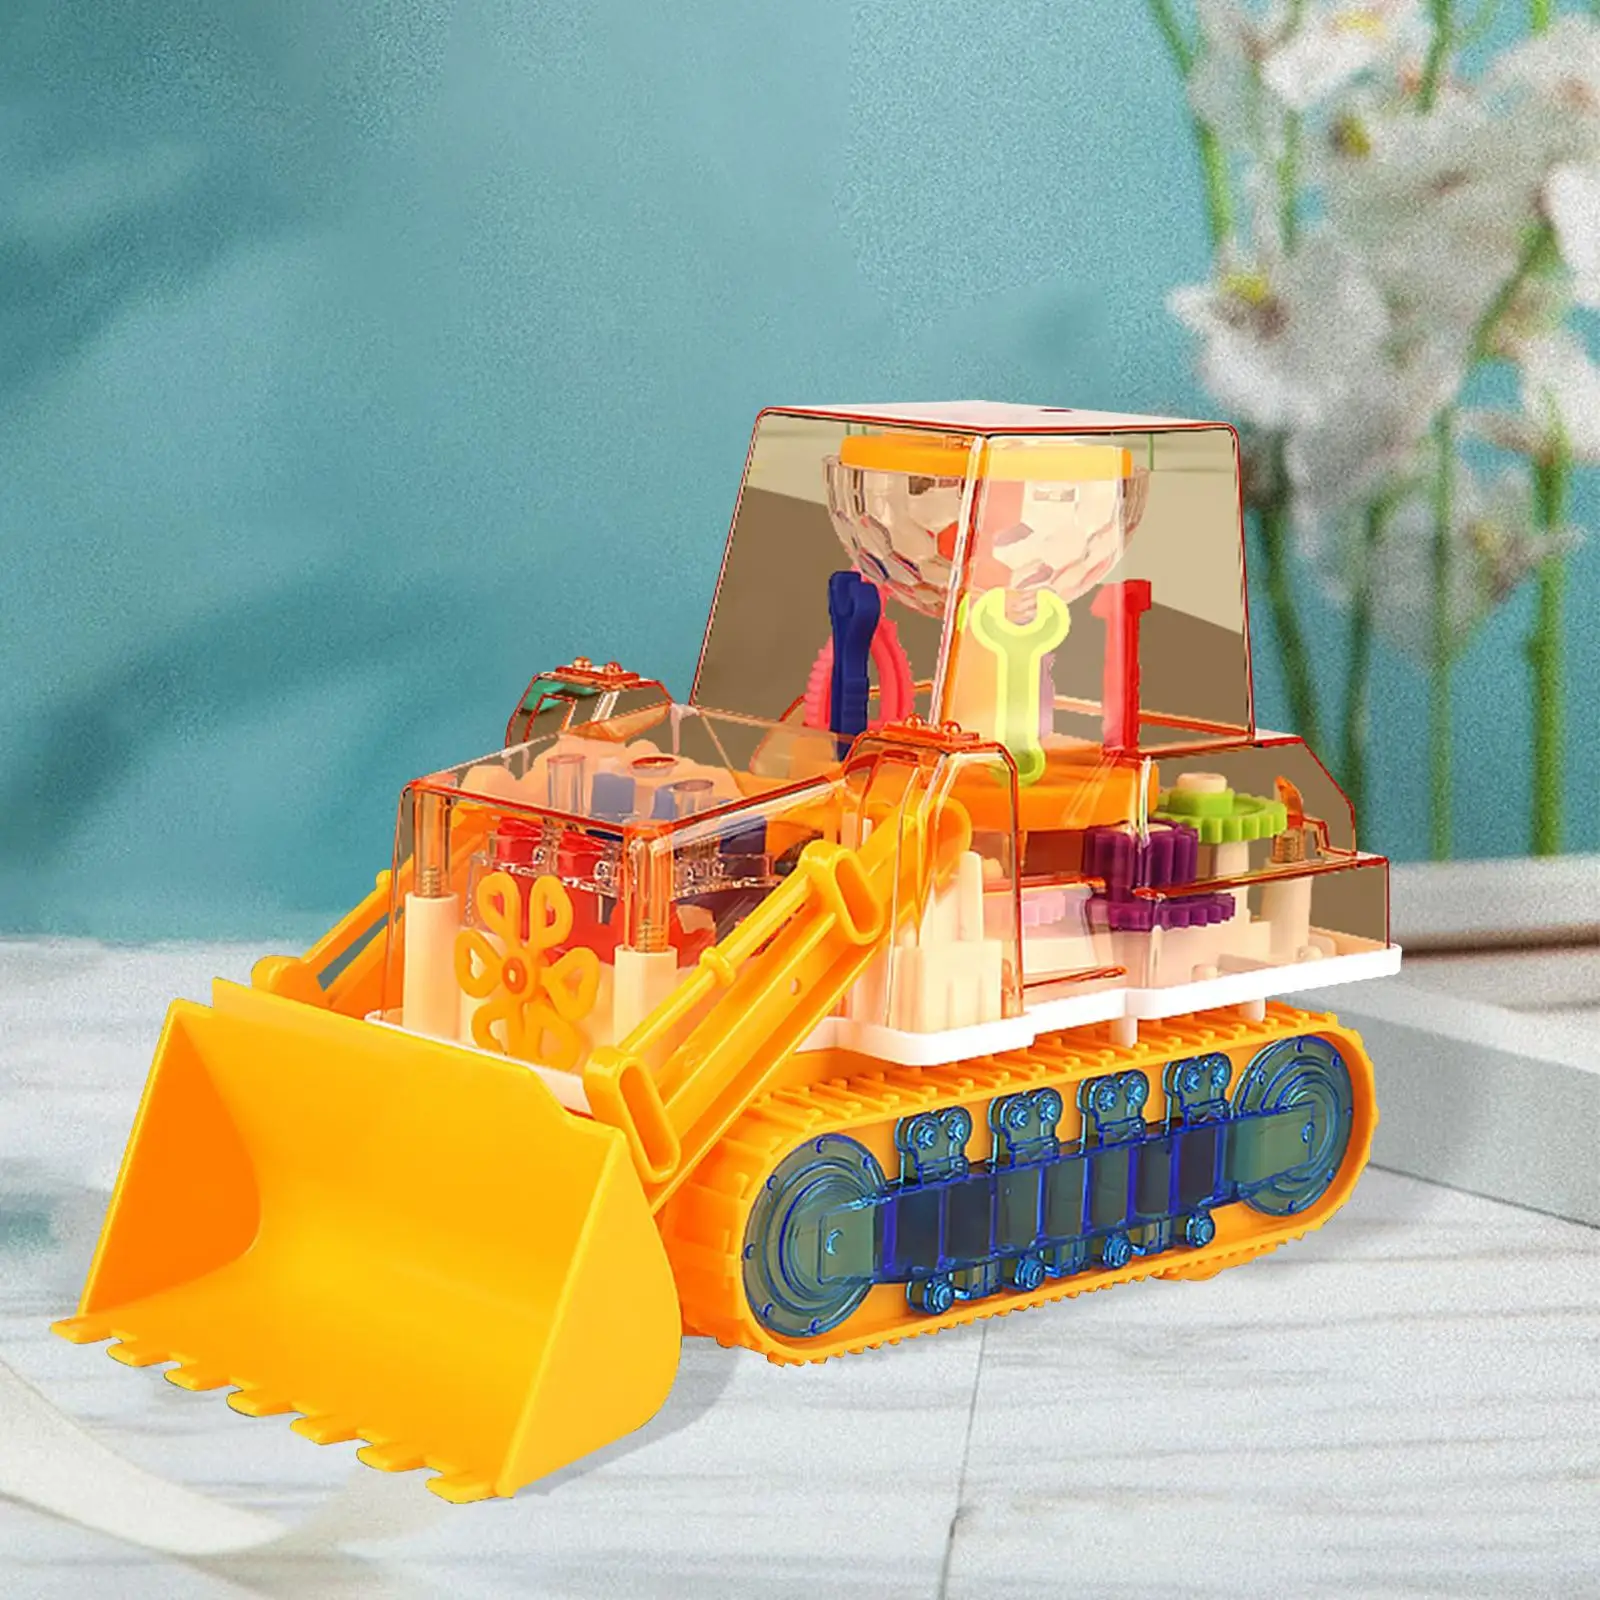 Construction Toys Trucks All Directions Mechanical Arm for Engineering Mixer